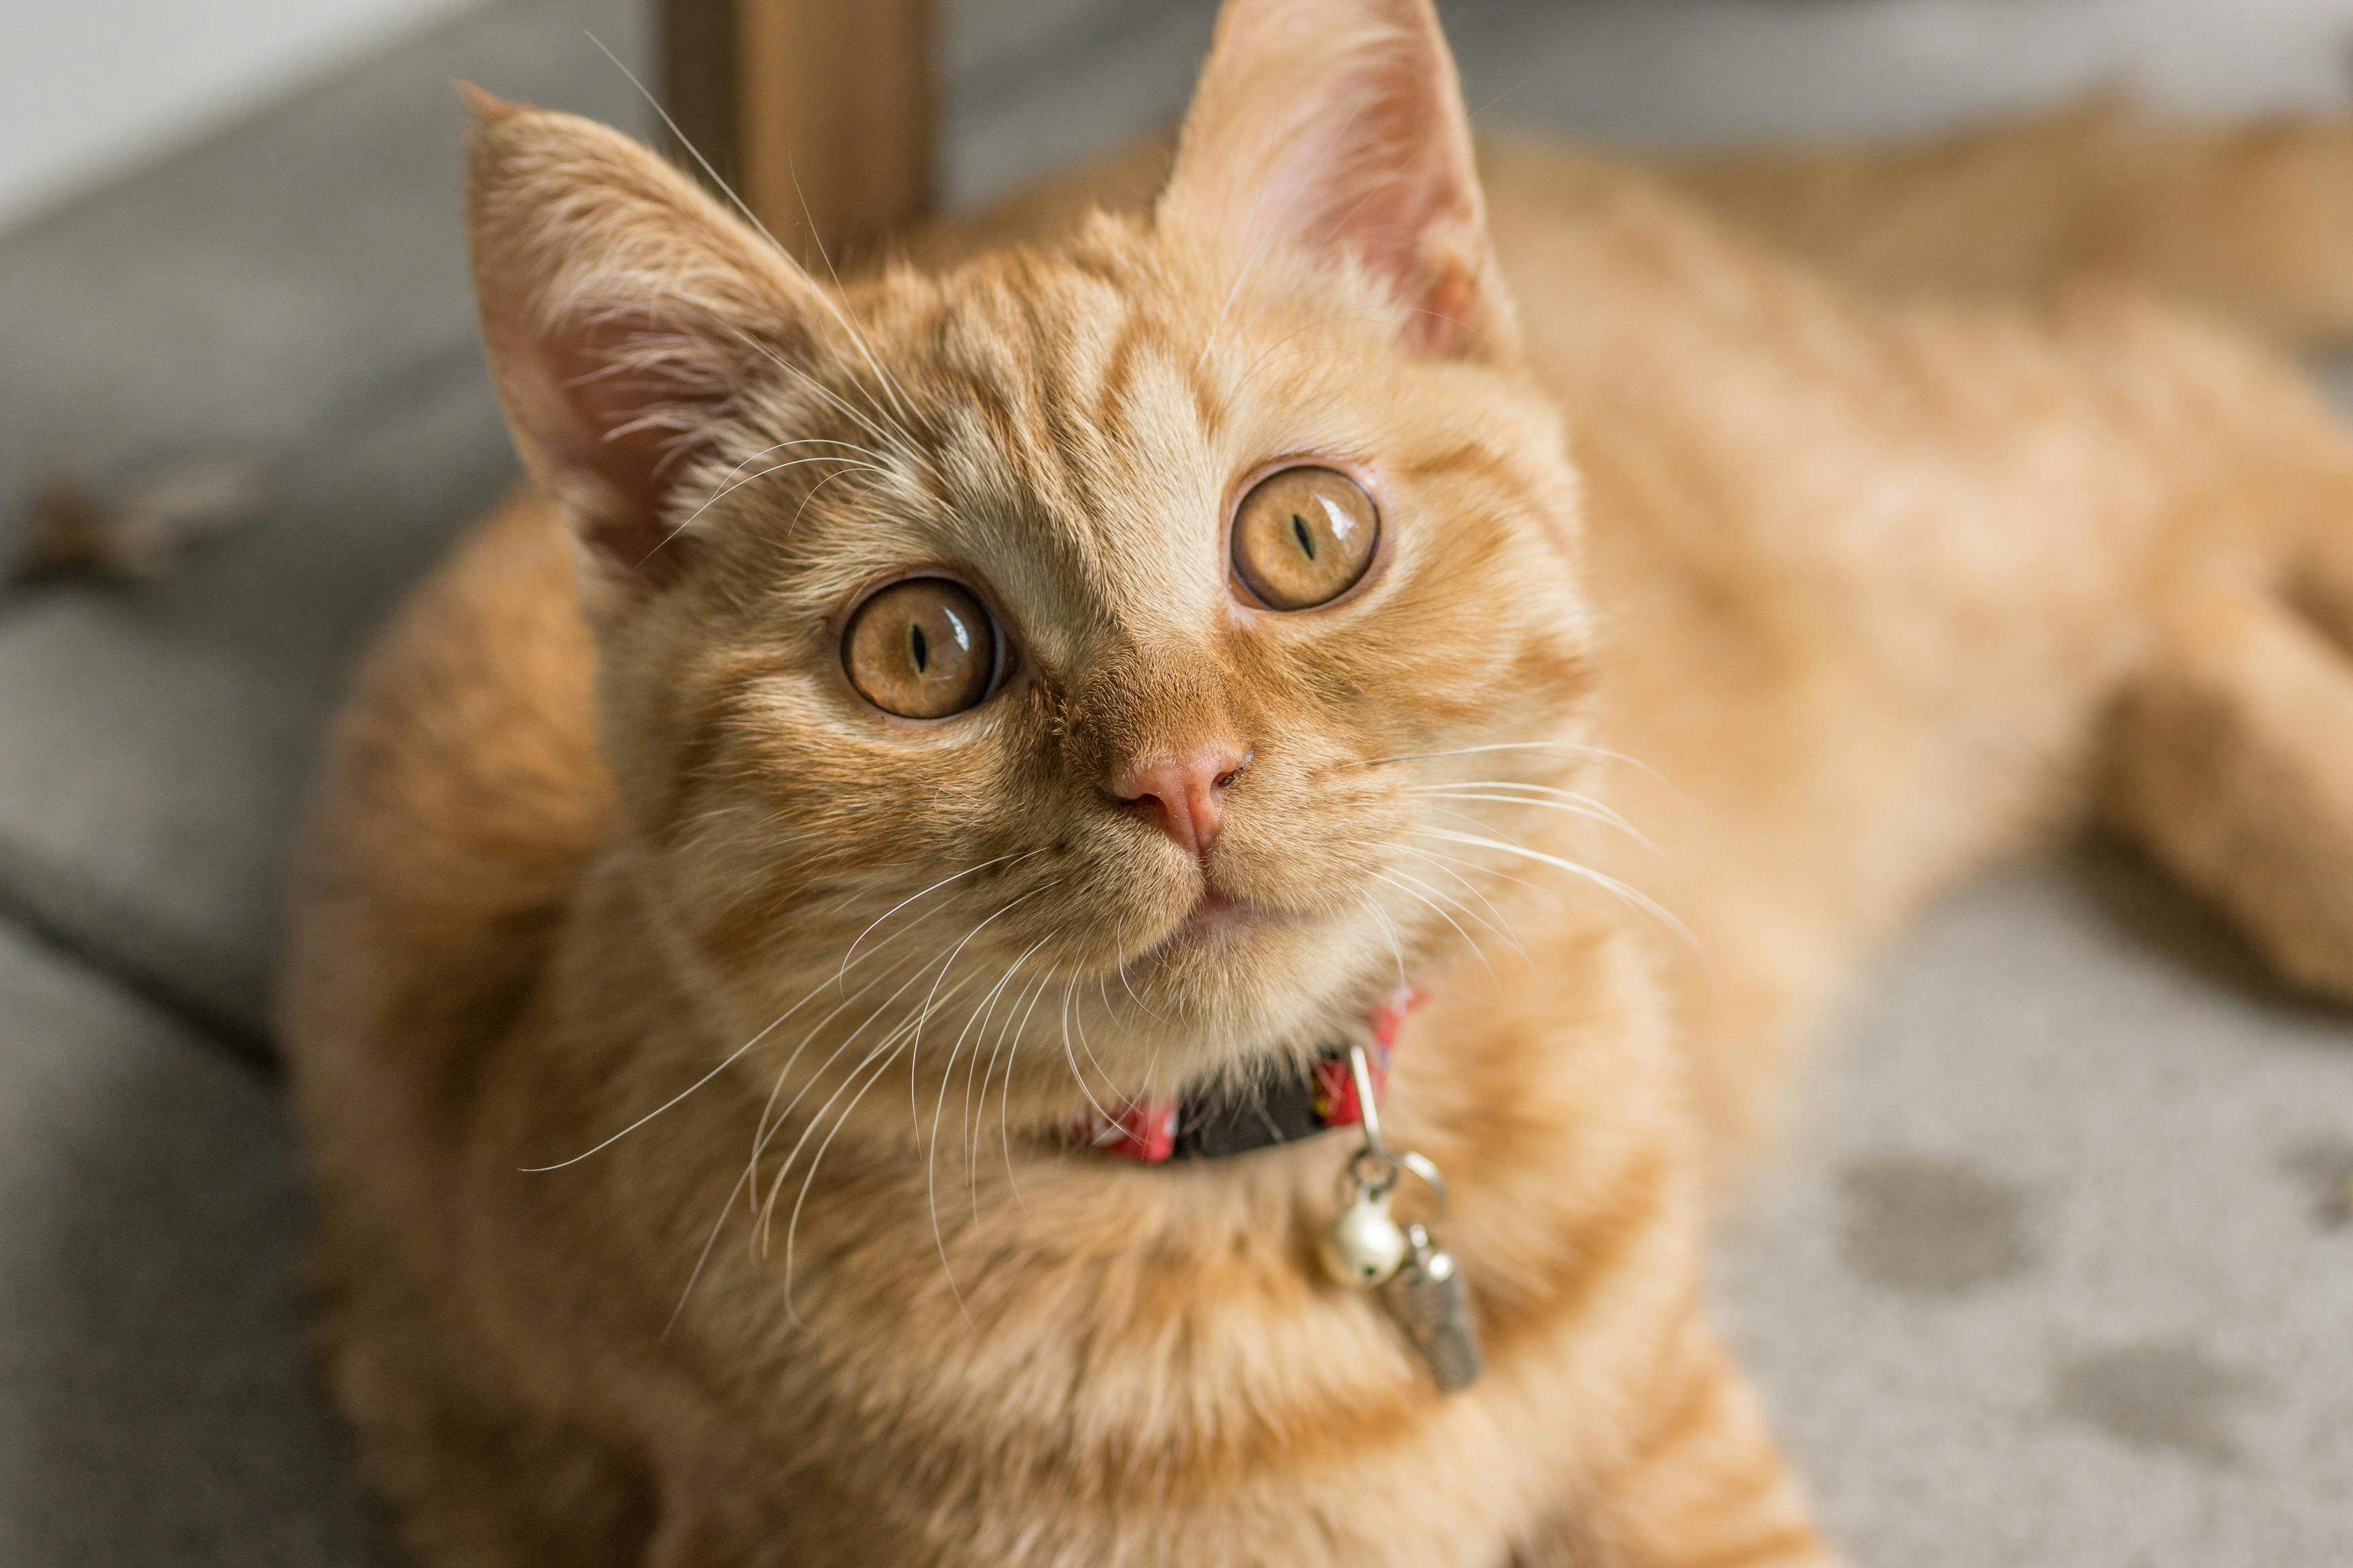 Can I use an antiparasitic treatment for cats on dogs?